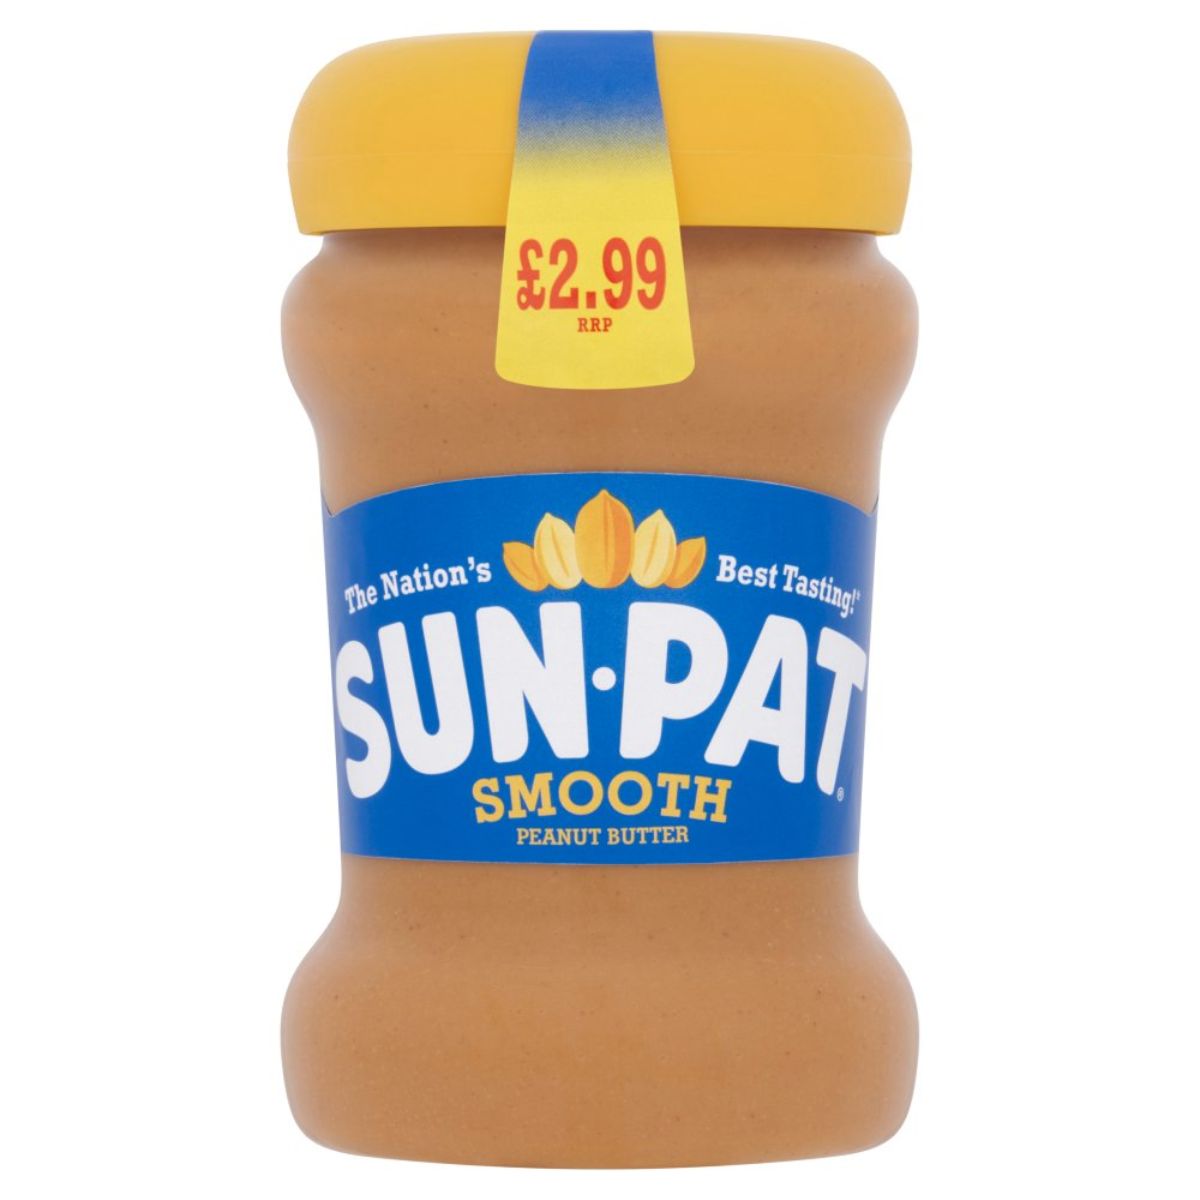 A jar of Sun Pat - Smooth Peanut Butter - 300g with a price tag of £2.99.